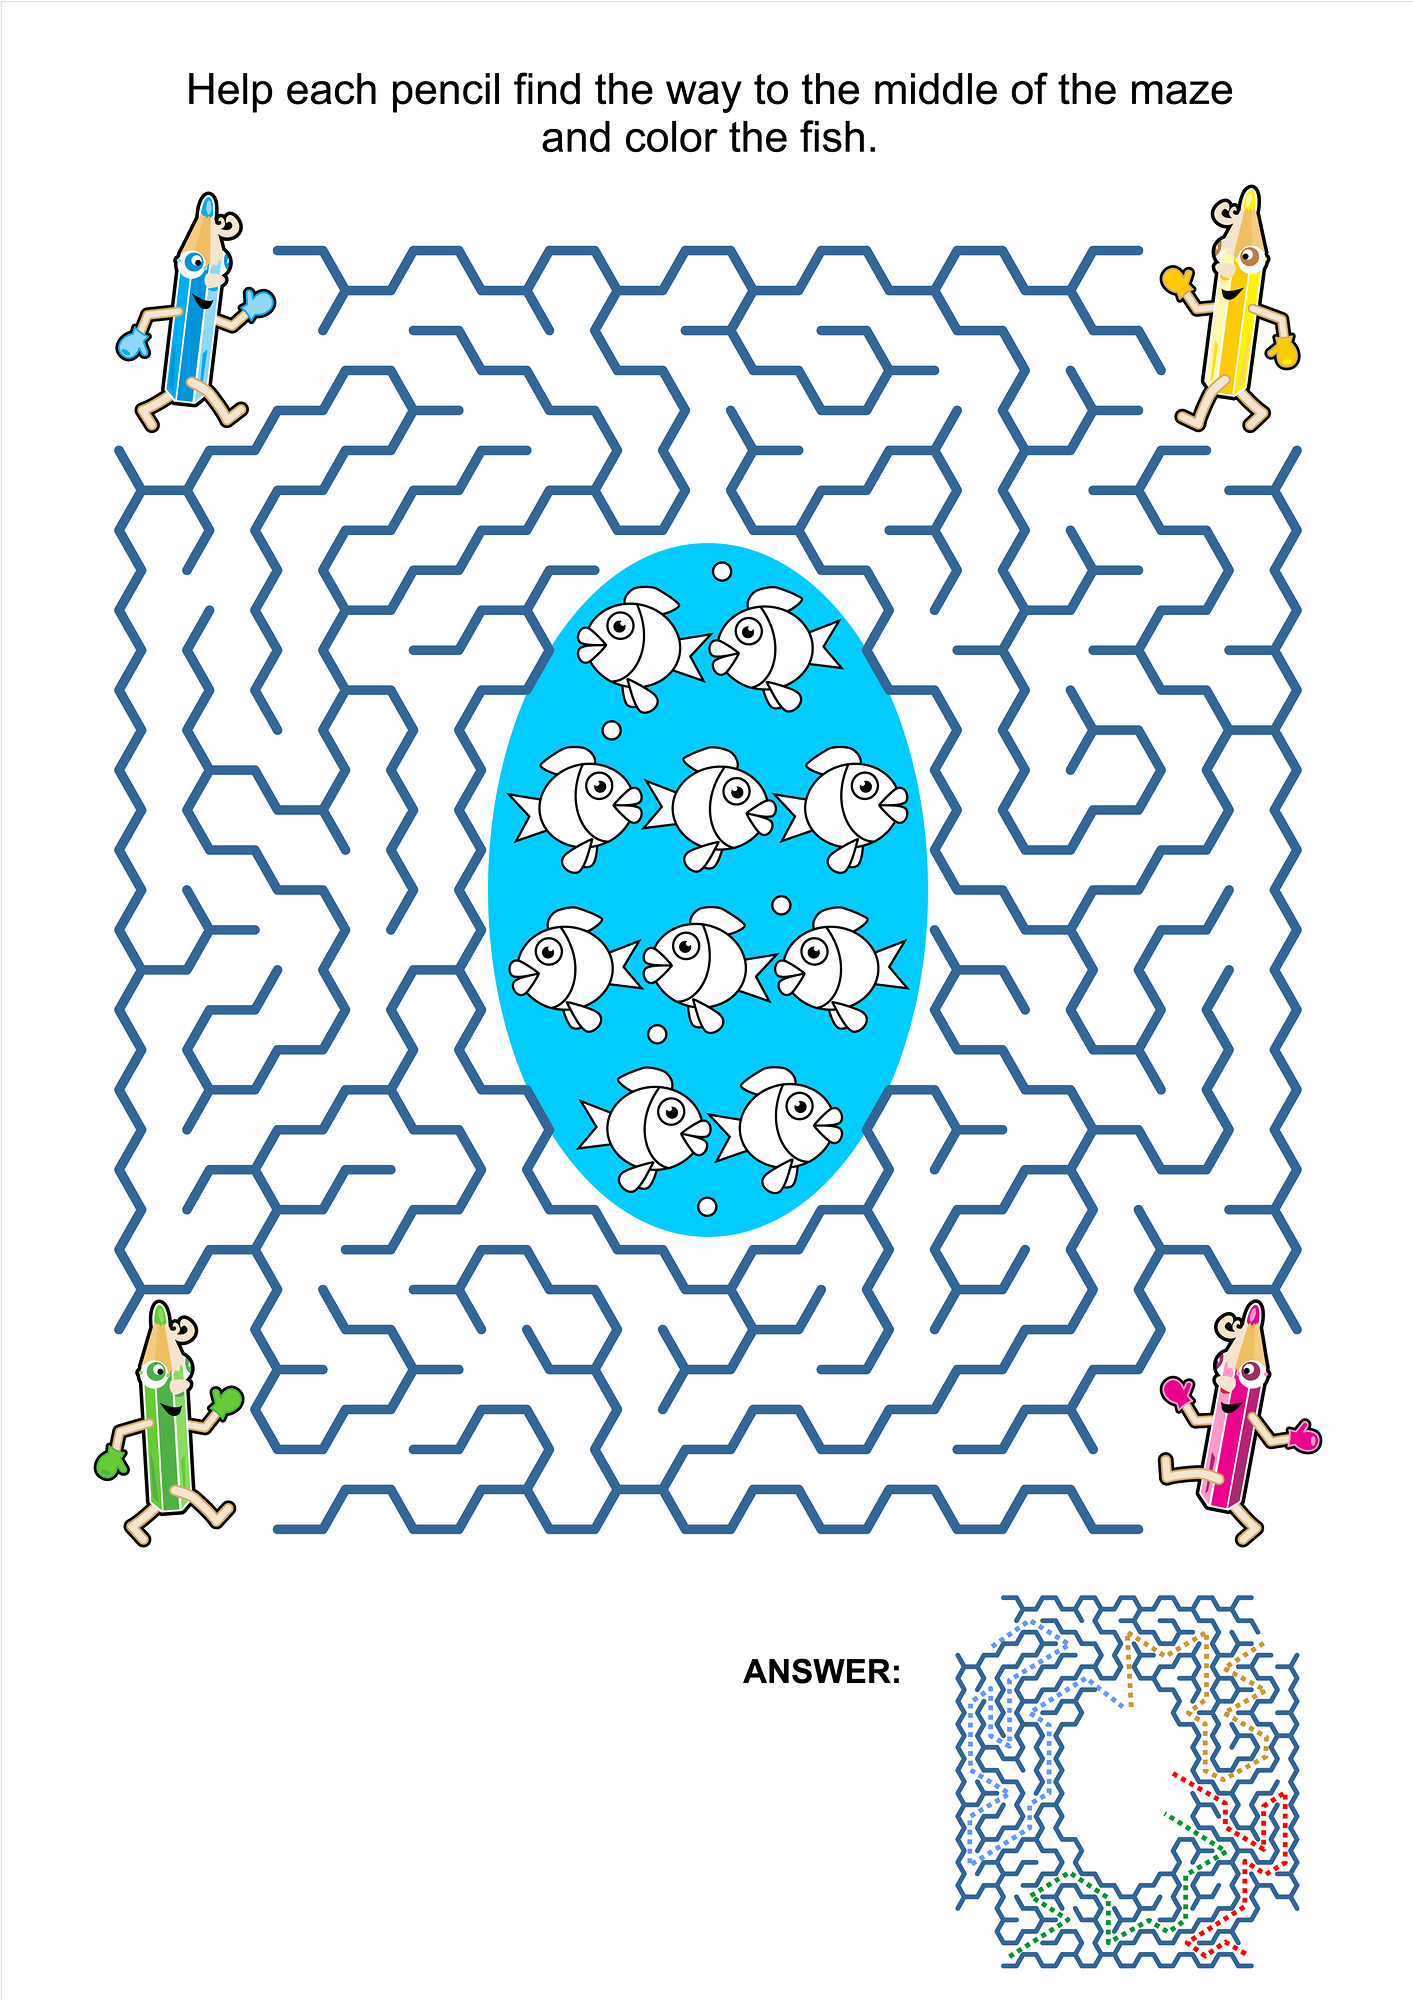 MLAK-Maze-game-and-coloring-page